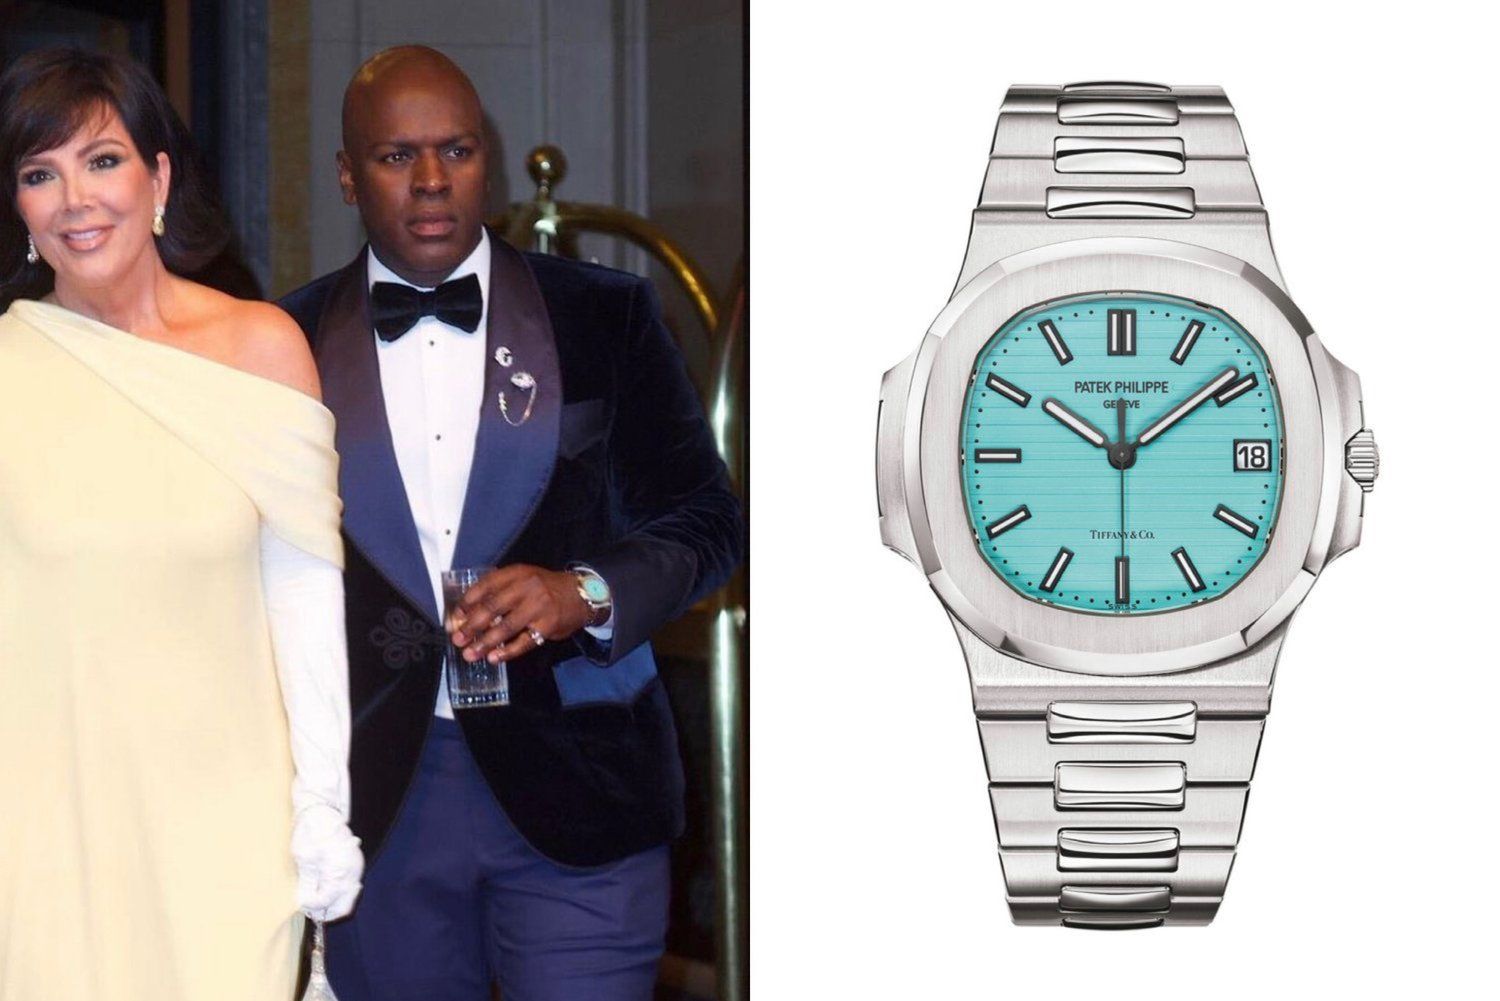 Patek Philippe Nautilus with Tiffany Blue Dial Sells for $6.5